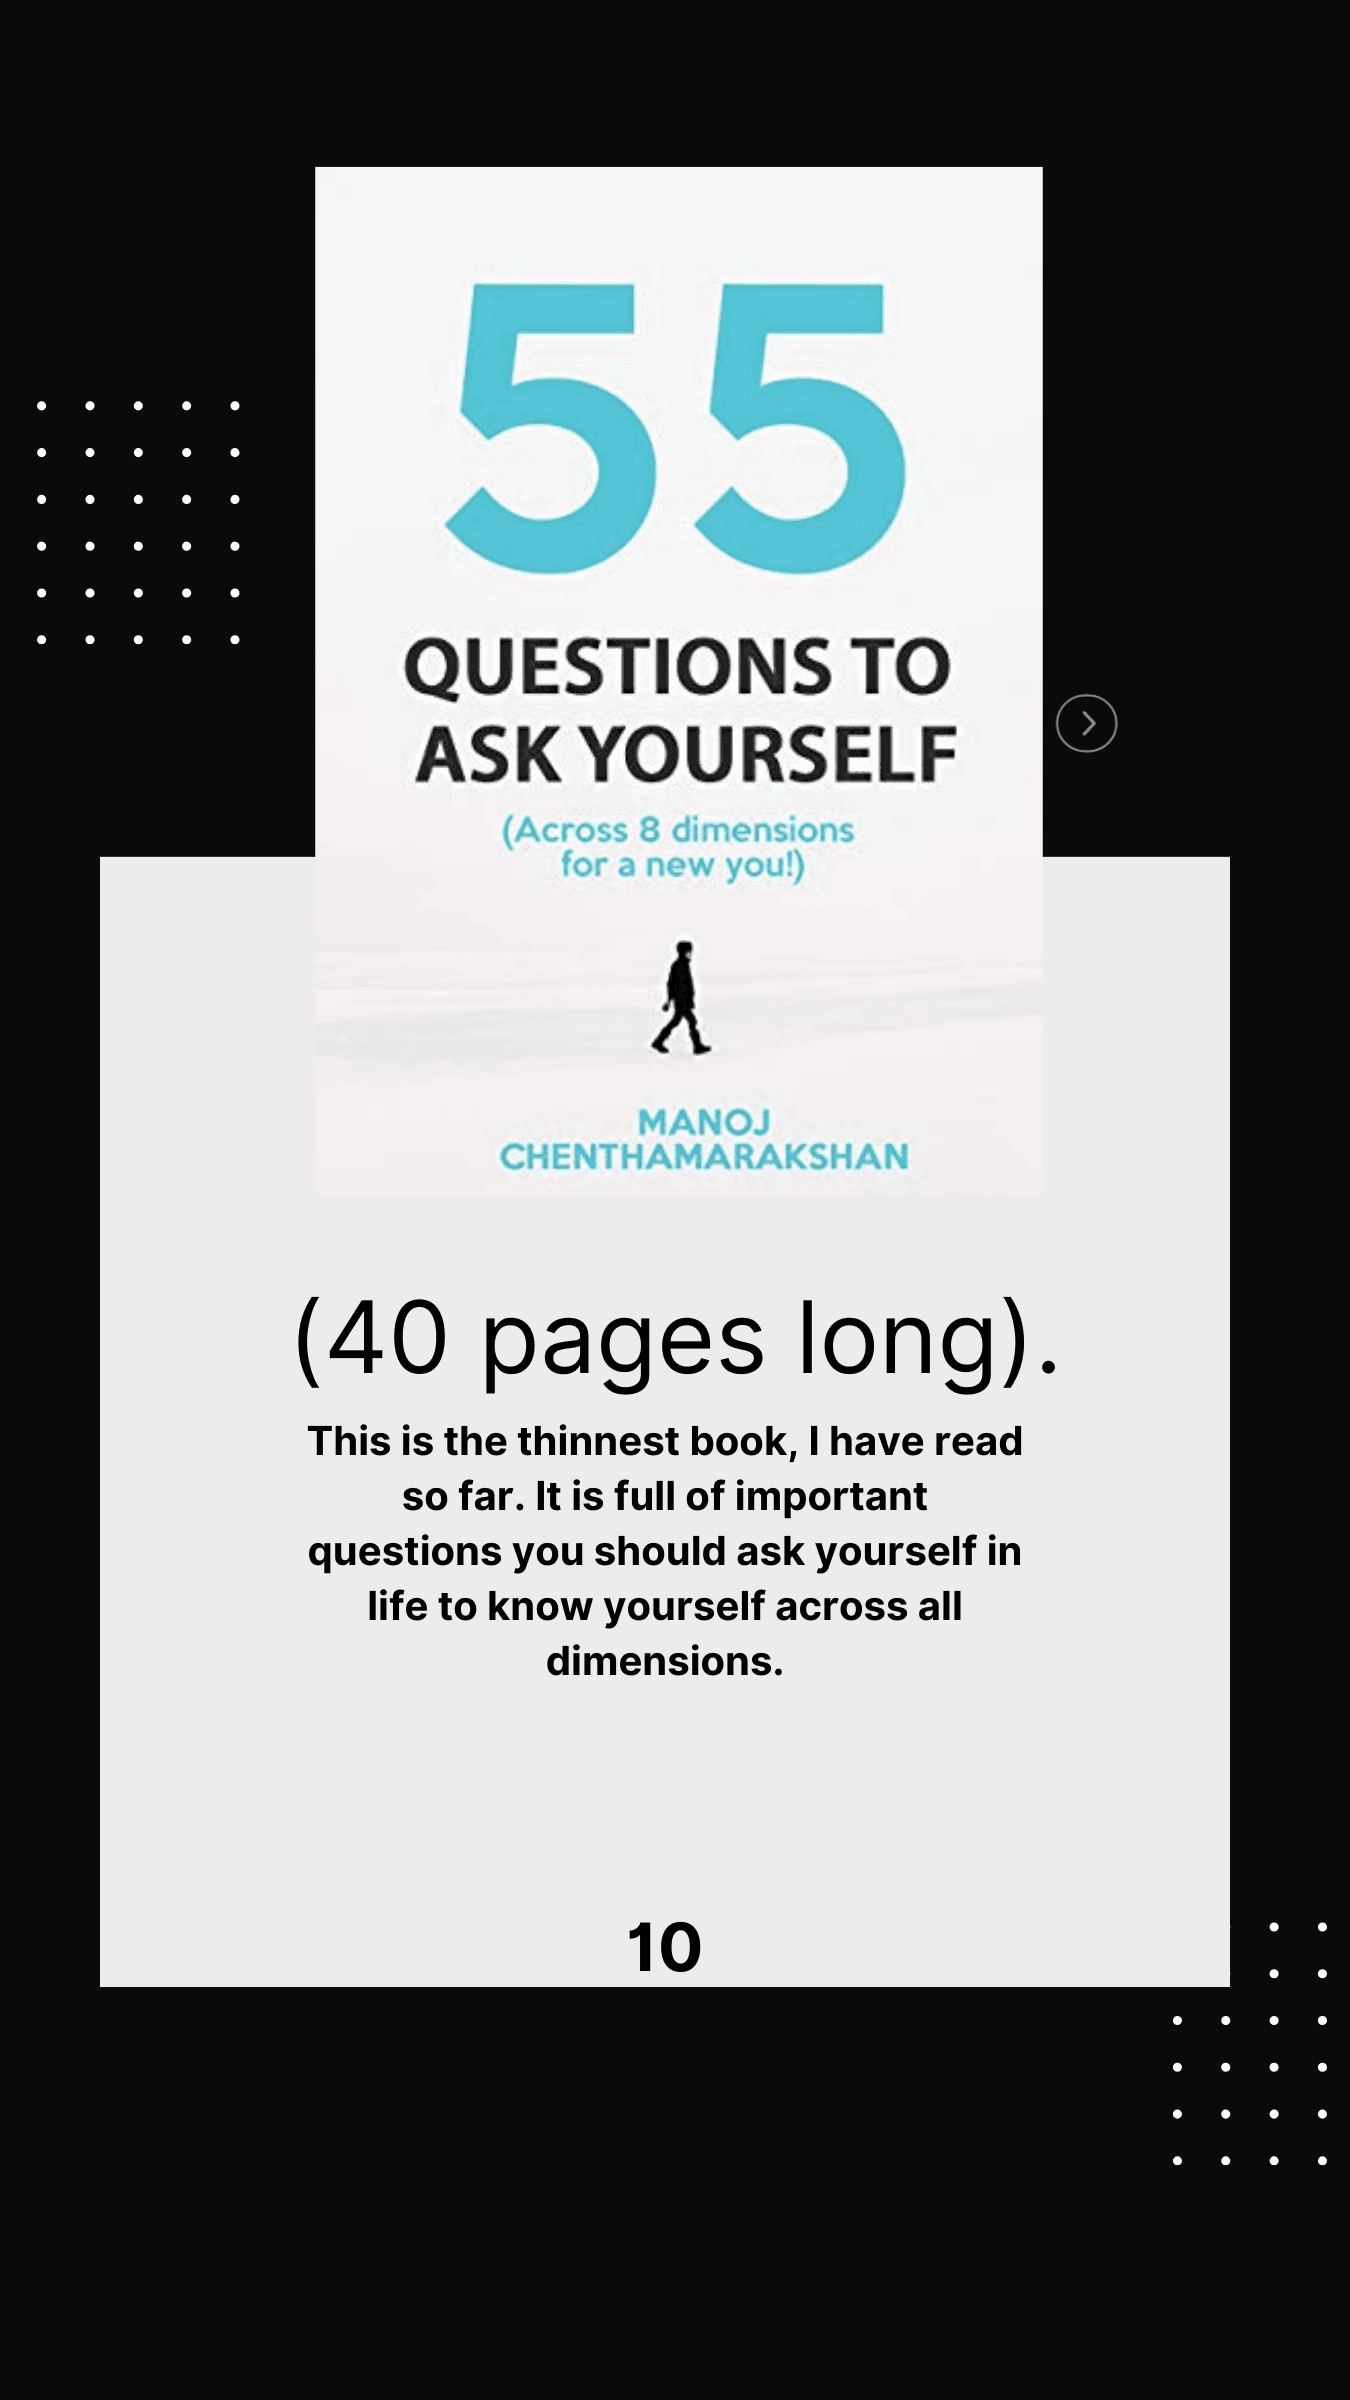 55 Questions to Ask Yourself by Manoj Chenthamarakshan